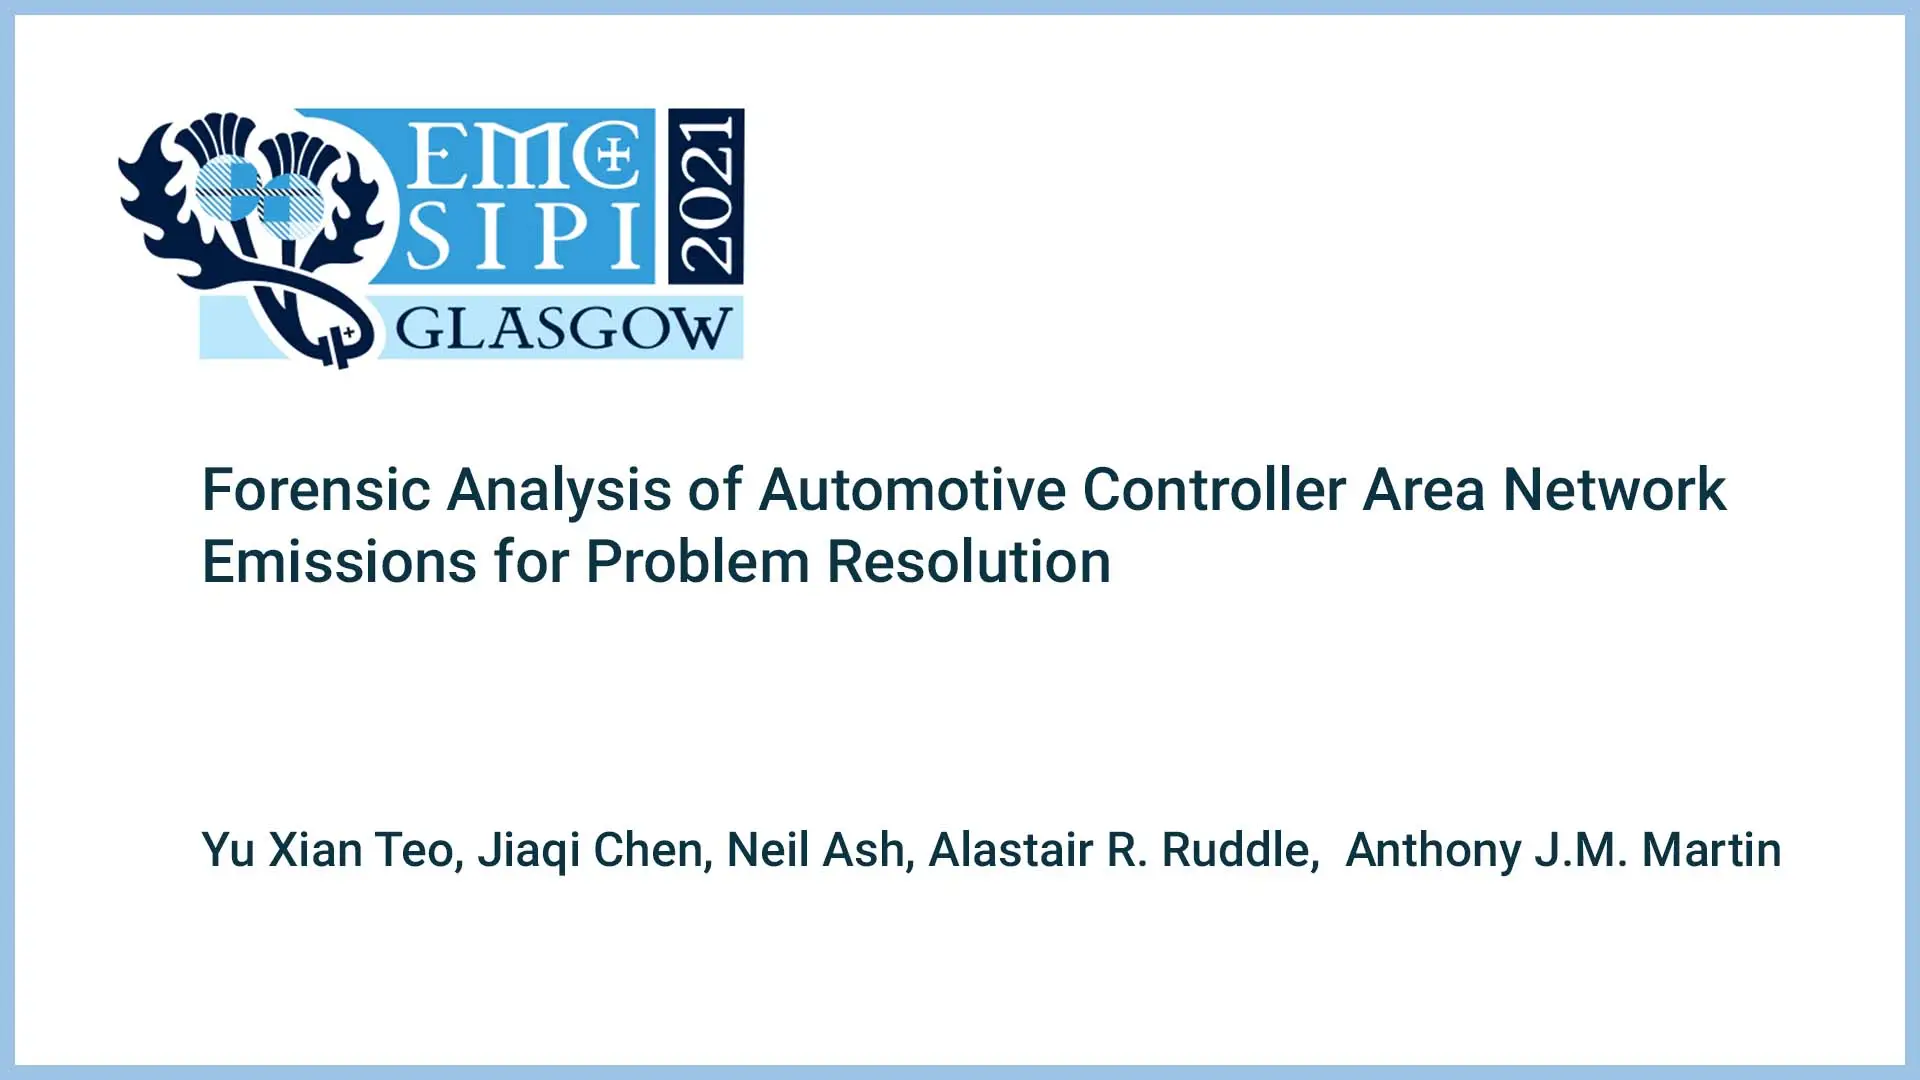 Forensic Analysis of Automotive Controller Area Network Emissions for Problem Resolution